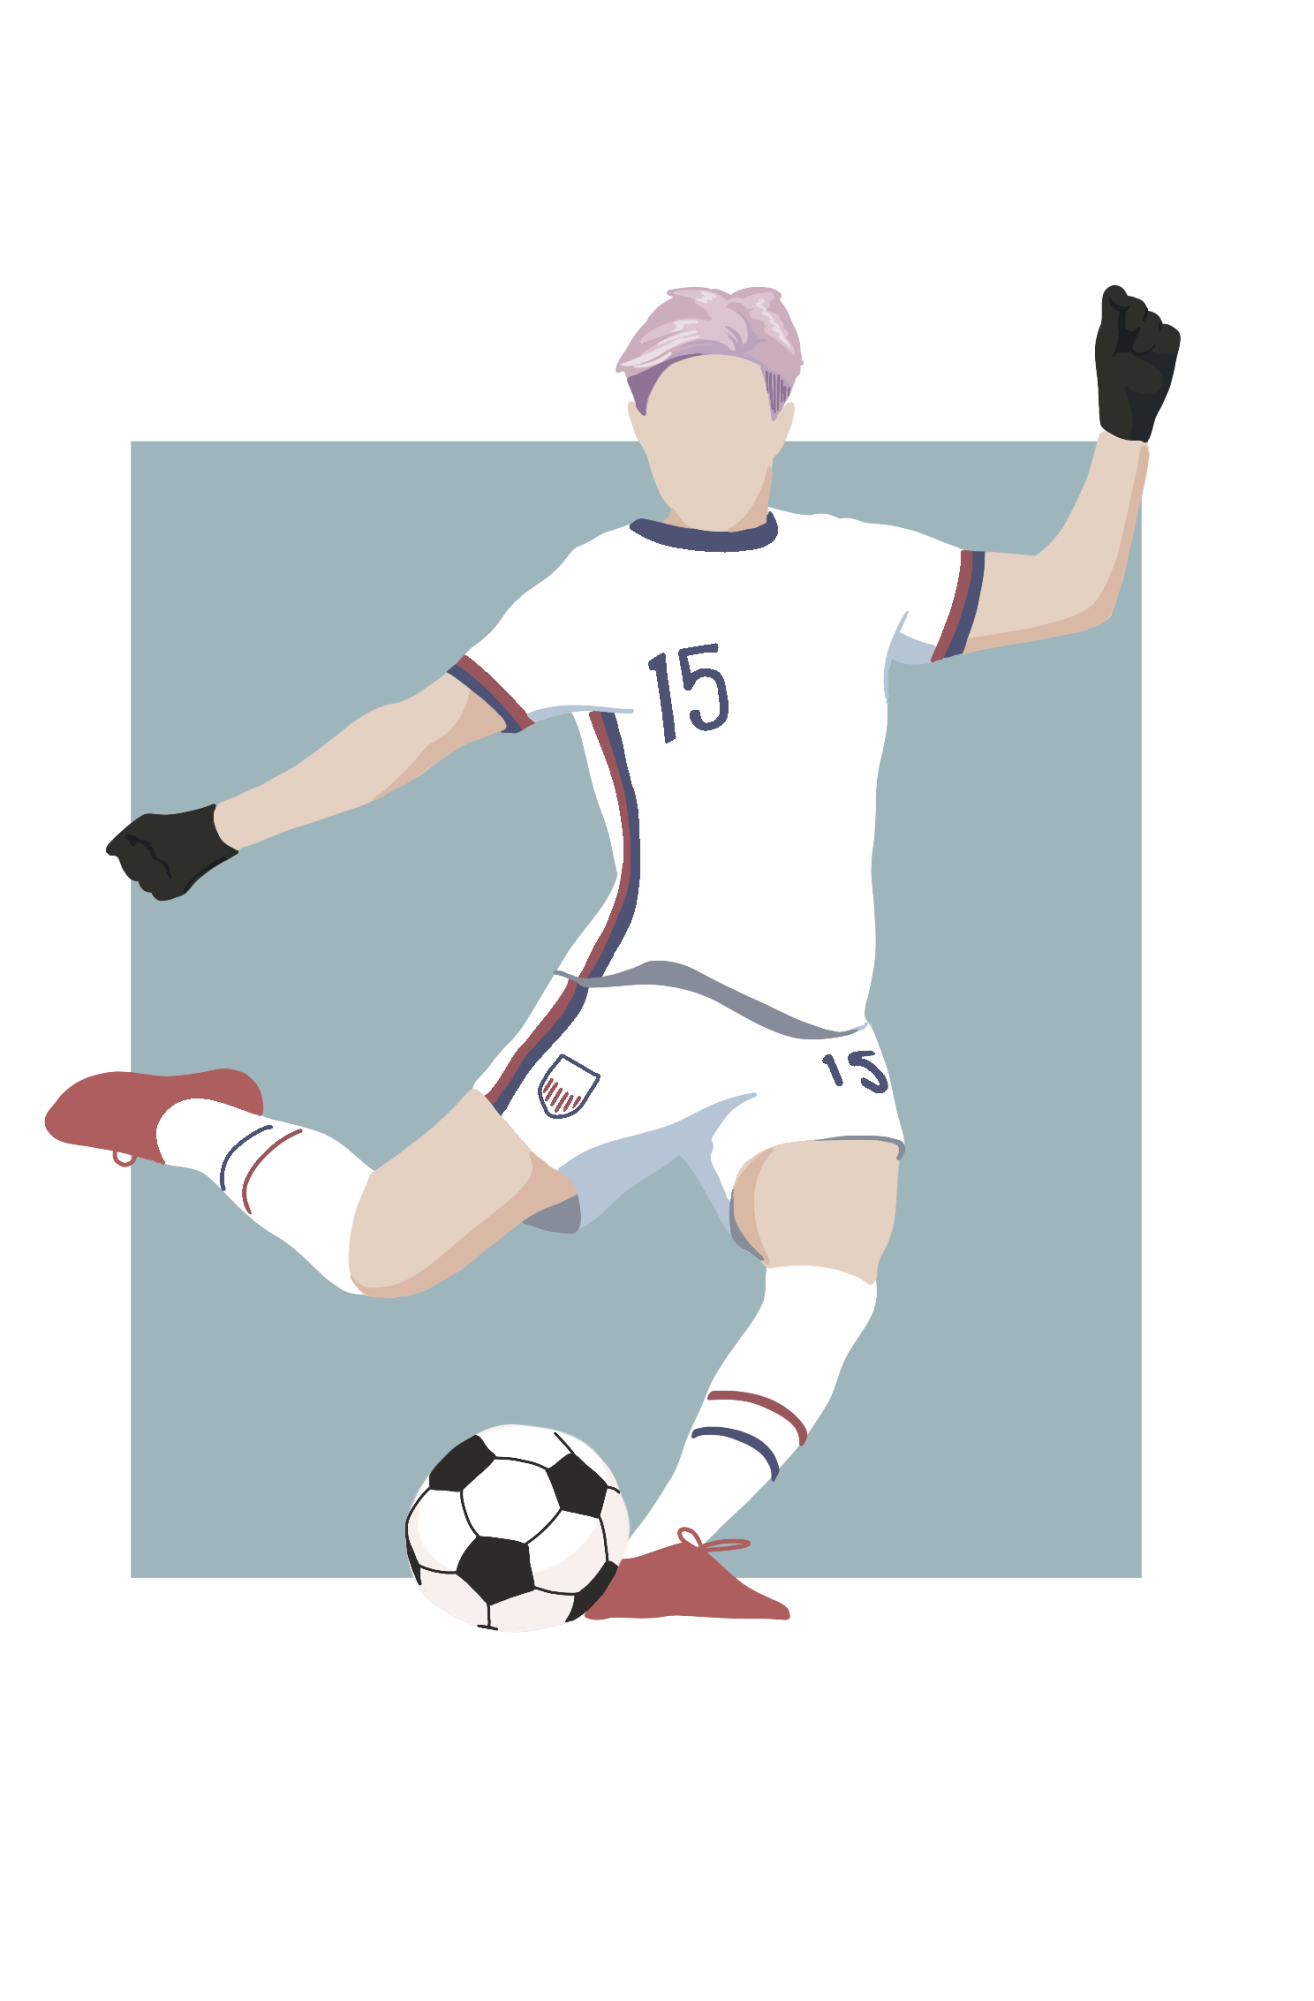 An image shows Megan Rapinoe playing at a soccer game as part of the United States womens national soccer team. Junior Anika Rodriguez said she admires Rapinoe for her courage to fight for equality. (Graphic Illustration by Bernice Wong)